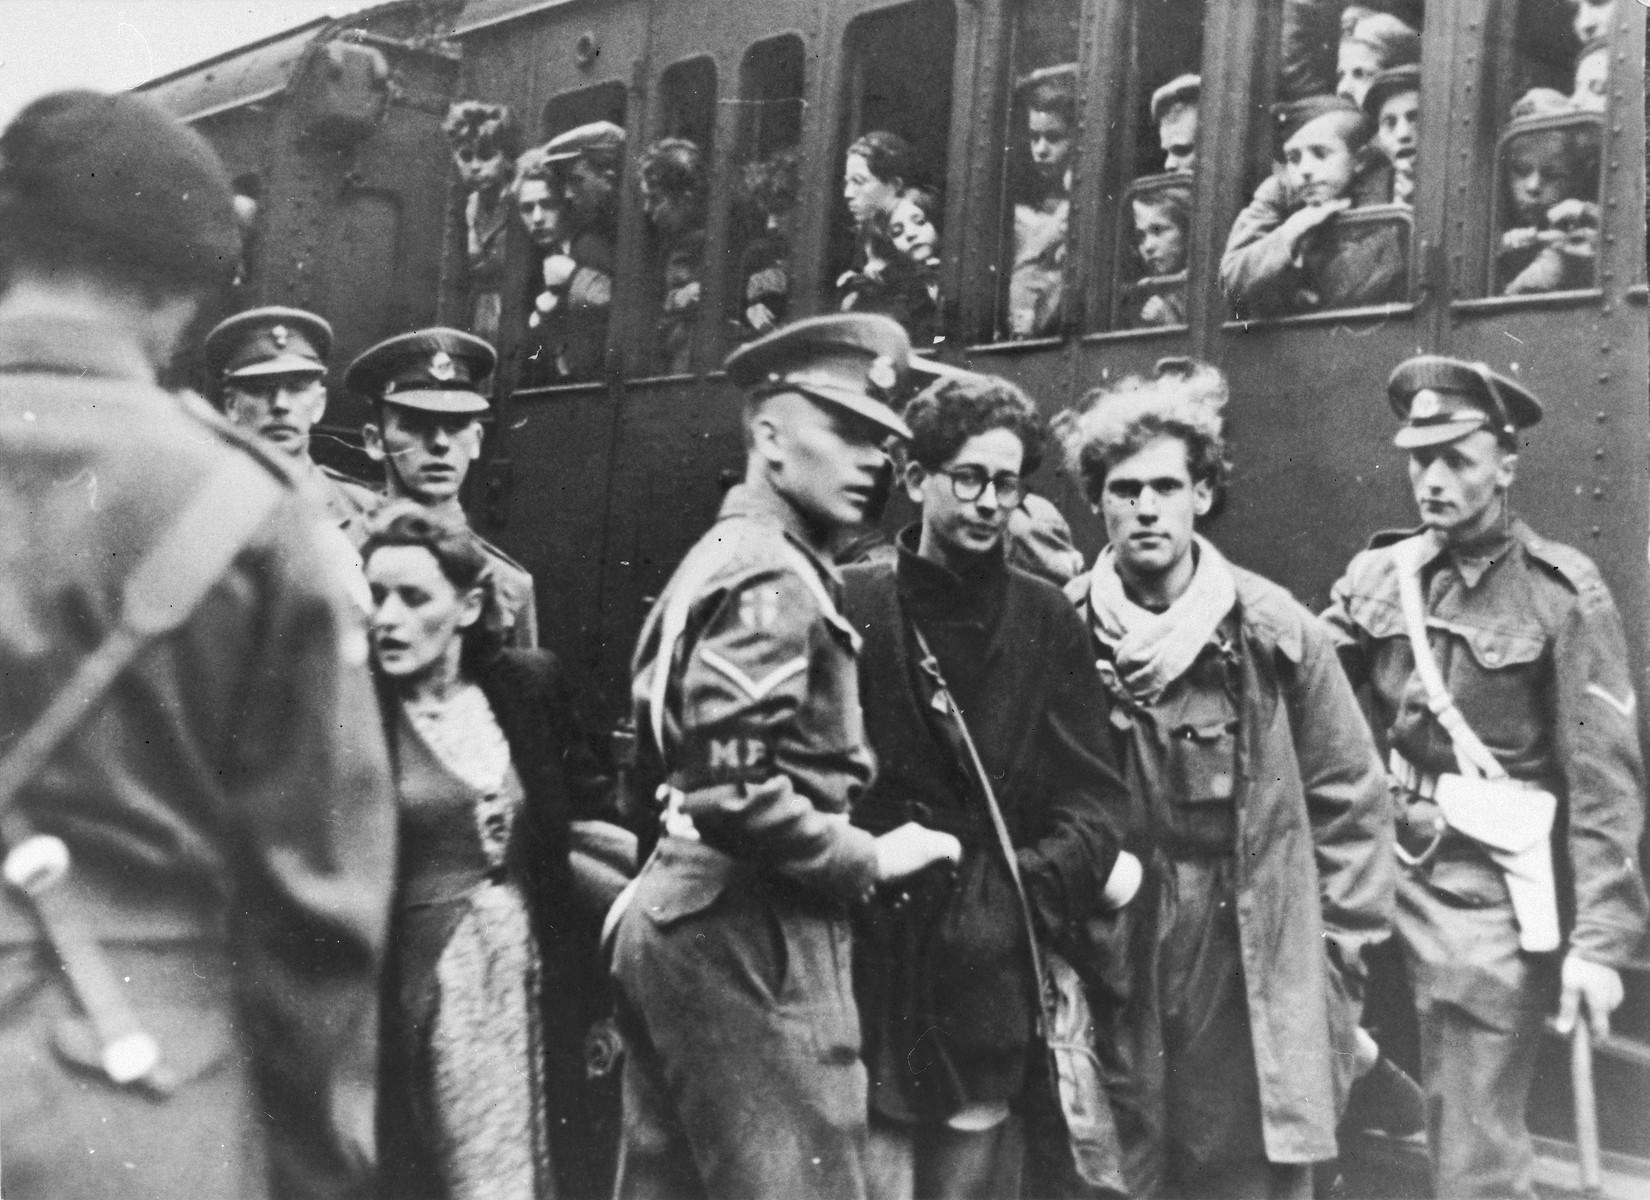 British police escort two former passengers of the Exodus 1947 who were brought back to Europe, at the train station in Hamburg.

Pictured are Benno Ginsburg (right) and Jacques Rabinovich (left, wearing glasses).